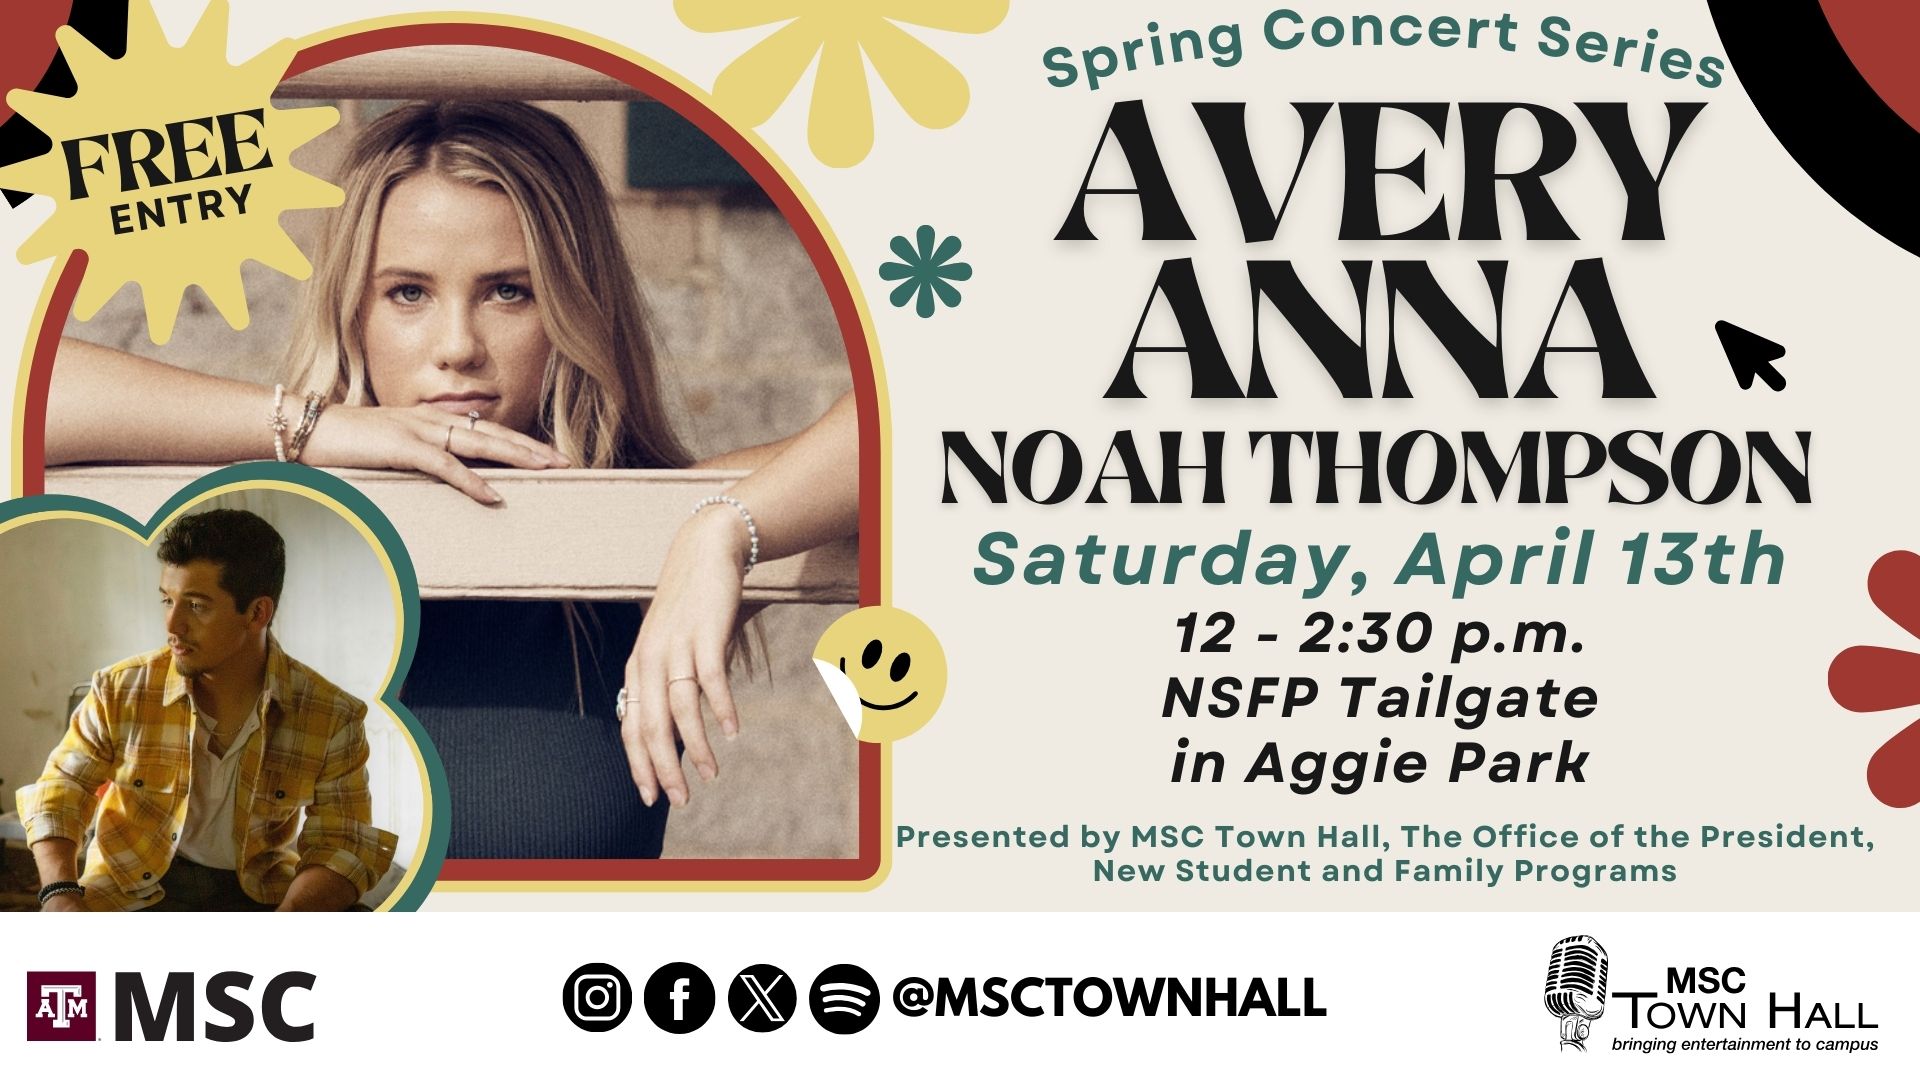 Spring Concert Series Avery Ana, presented by MSC Town Hall , The Office of the President, New Student and Family Programs. Opener act: Noah Thompson. Saturday, April 13th, from 12 to 2:30 p.m., at the NSFP Tailgate in Aggie Park, Free Entry. Instagram , Facebook, X, Spotify @msctownhall